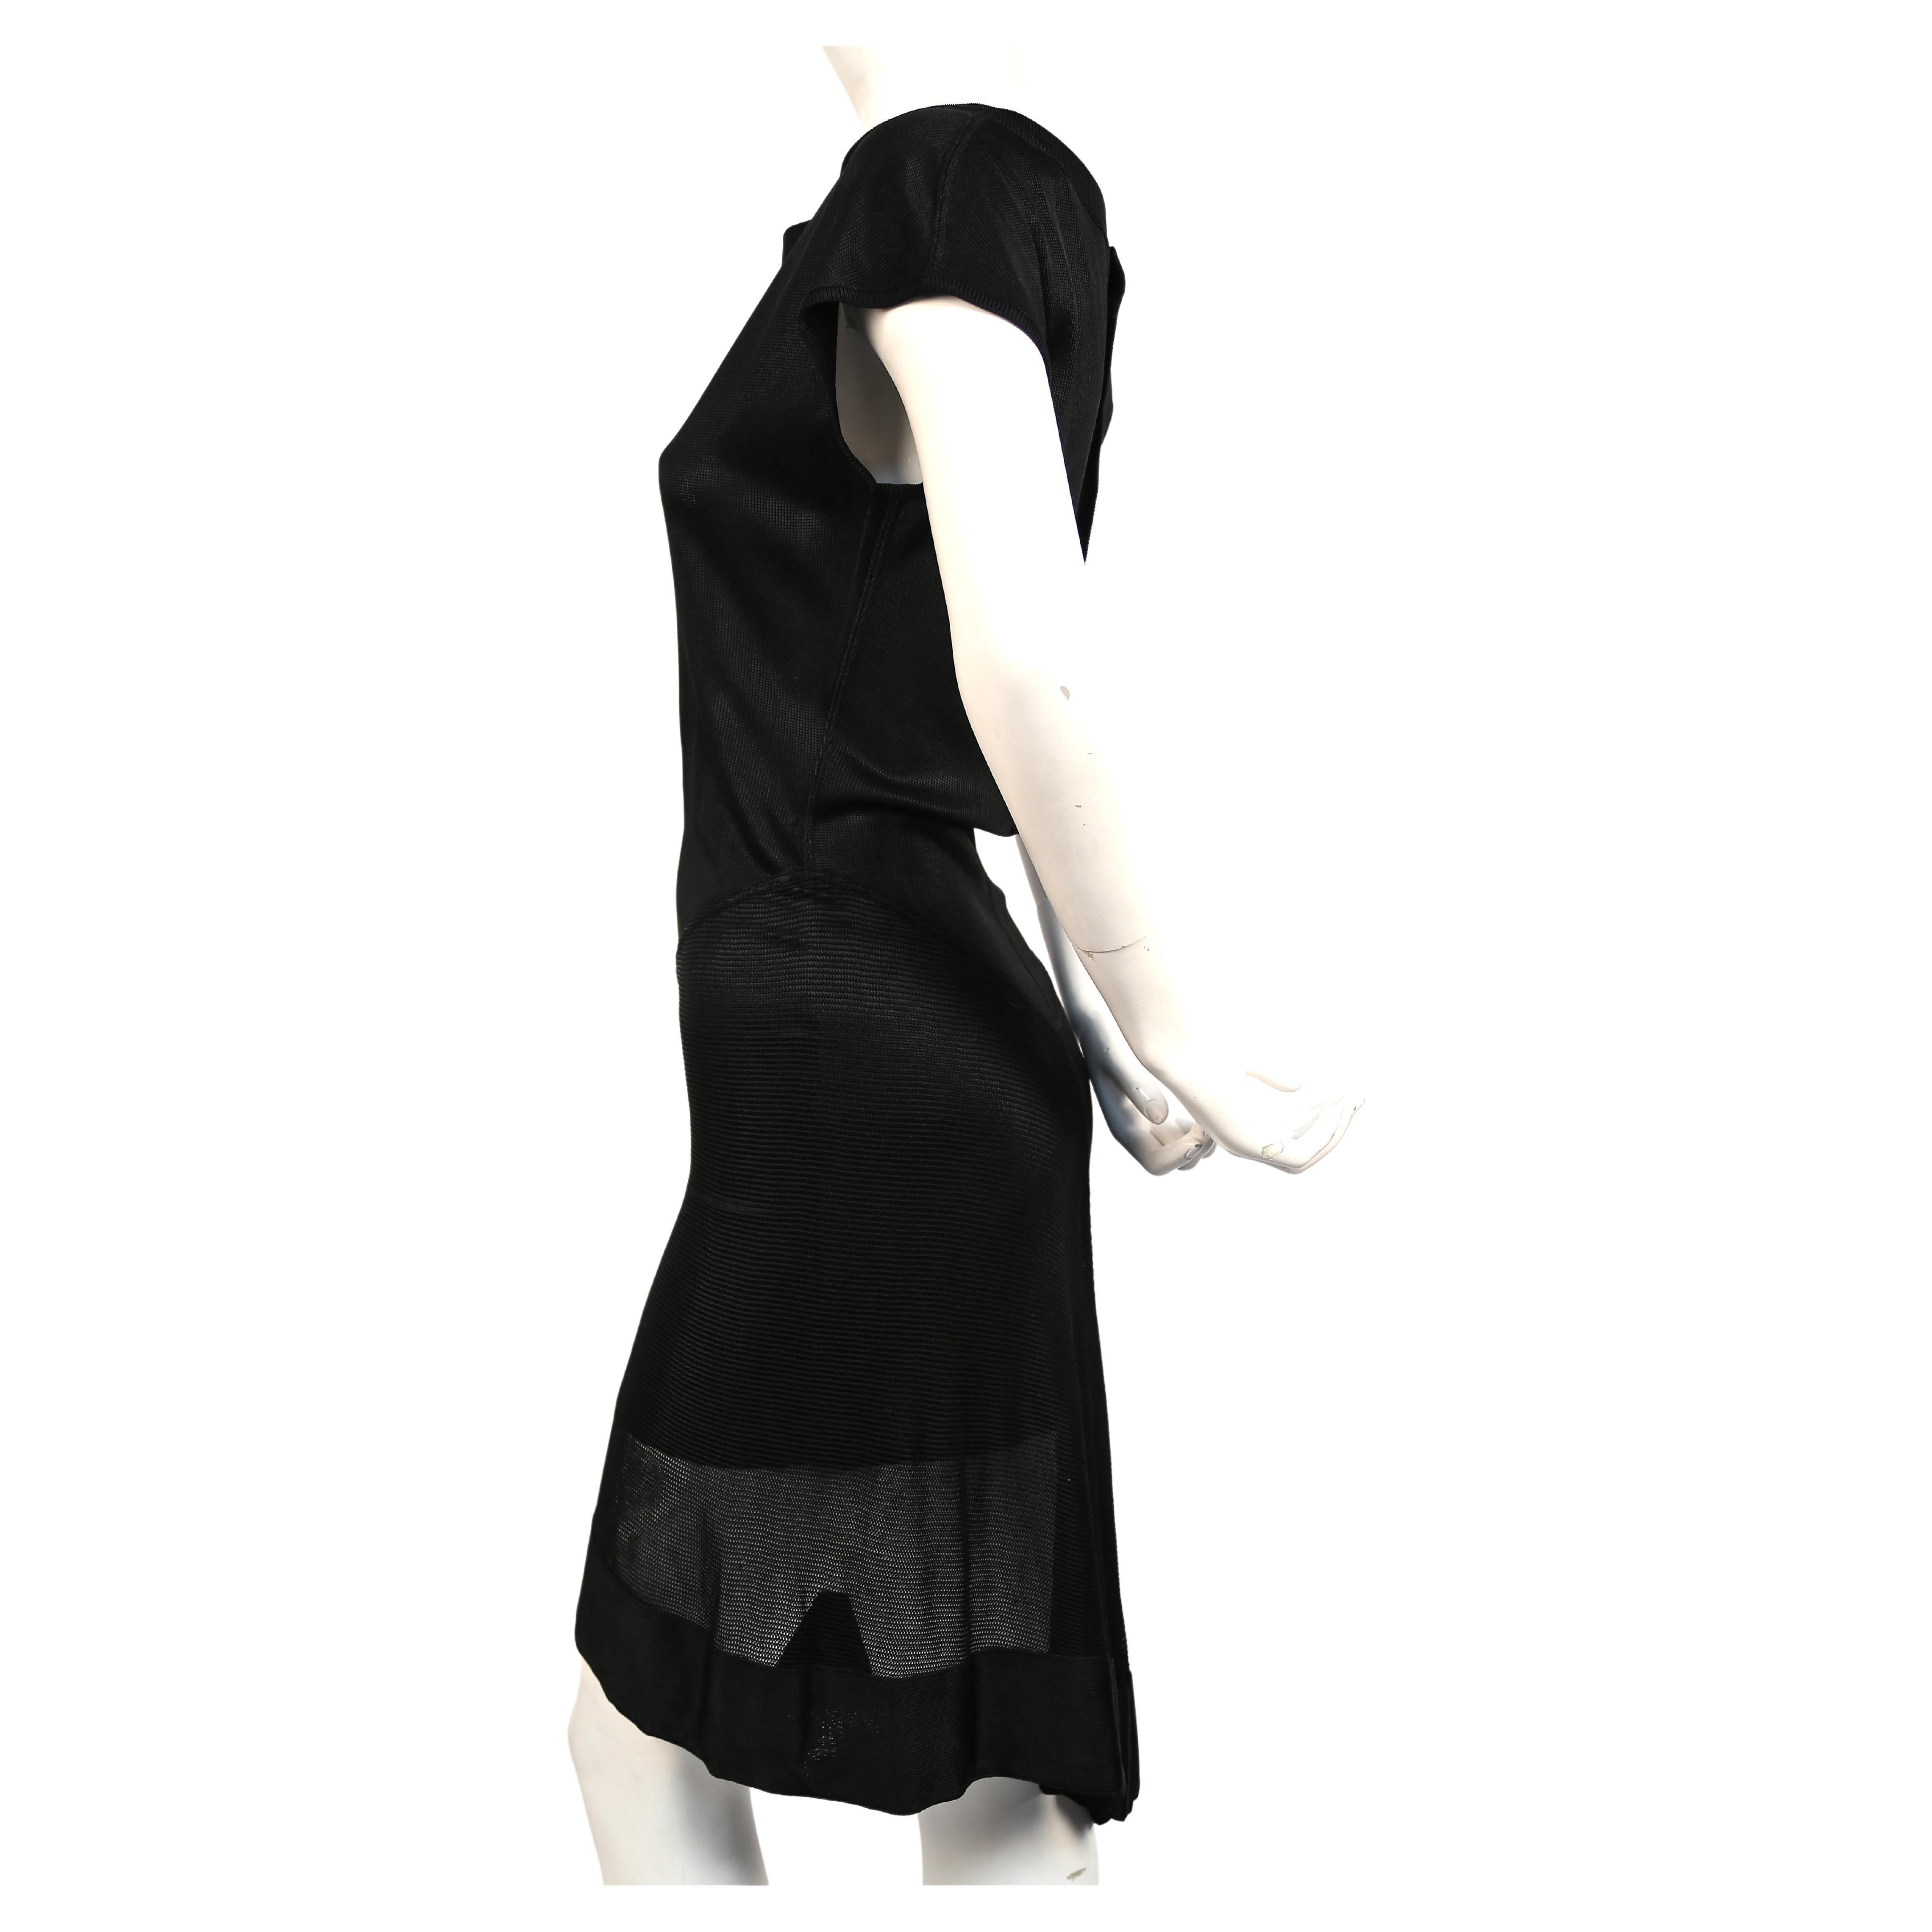 Jet black viscose dress with sheer asymmetrical hemline from Azzedine Alaia dating to spring of 1992. Labeled a size 'M', although this will also fit a size S. Approximate measurements: 33-34